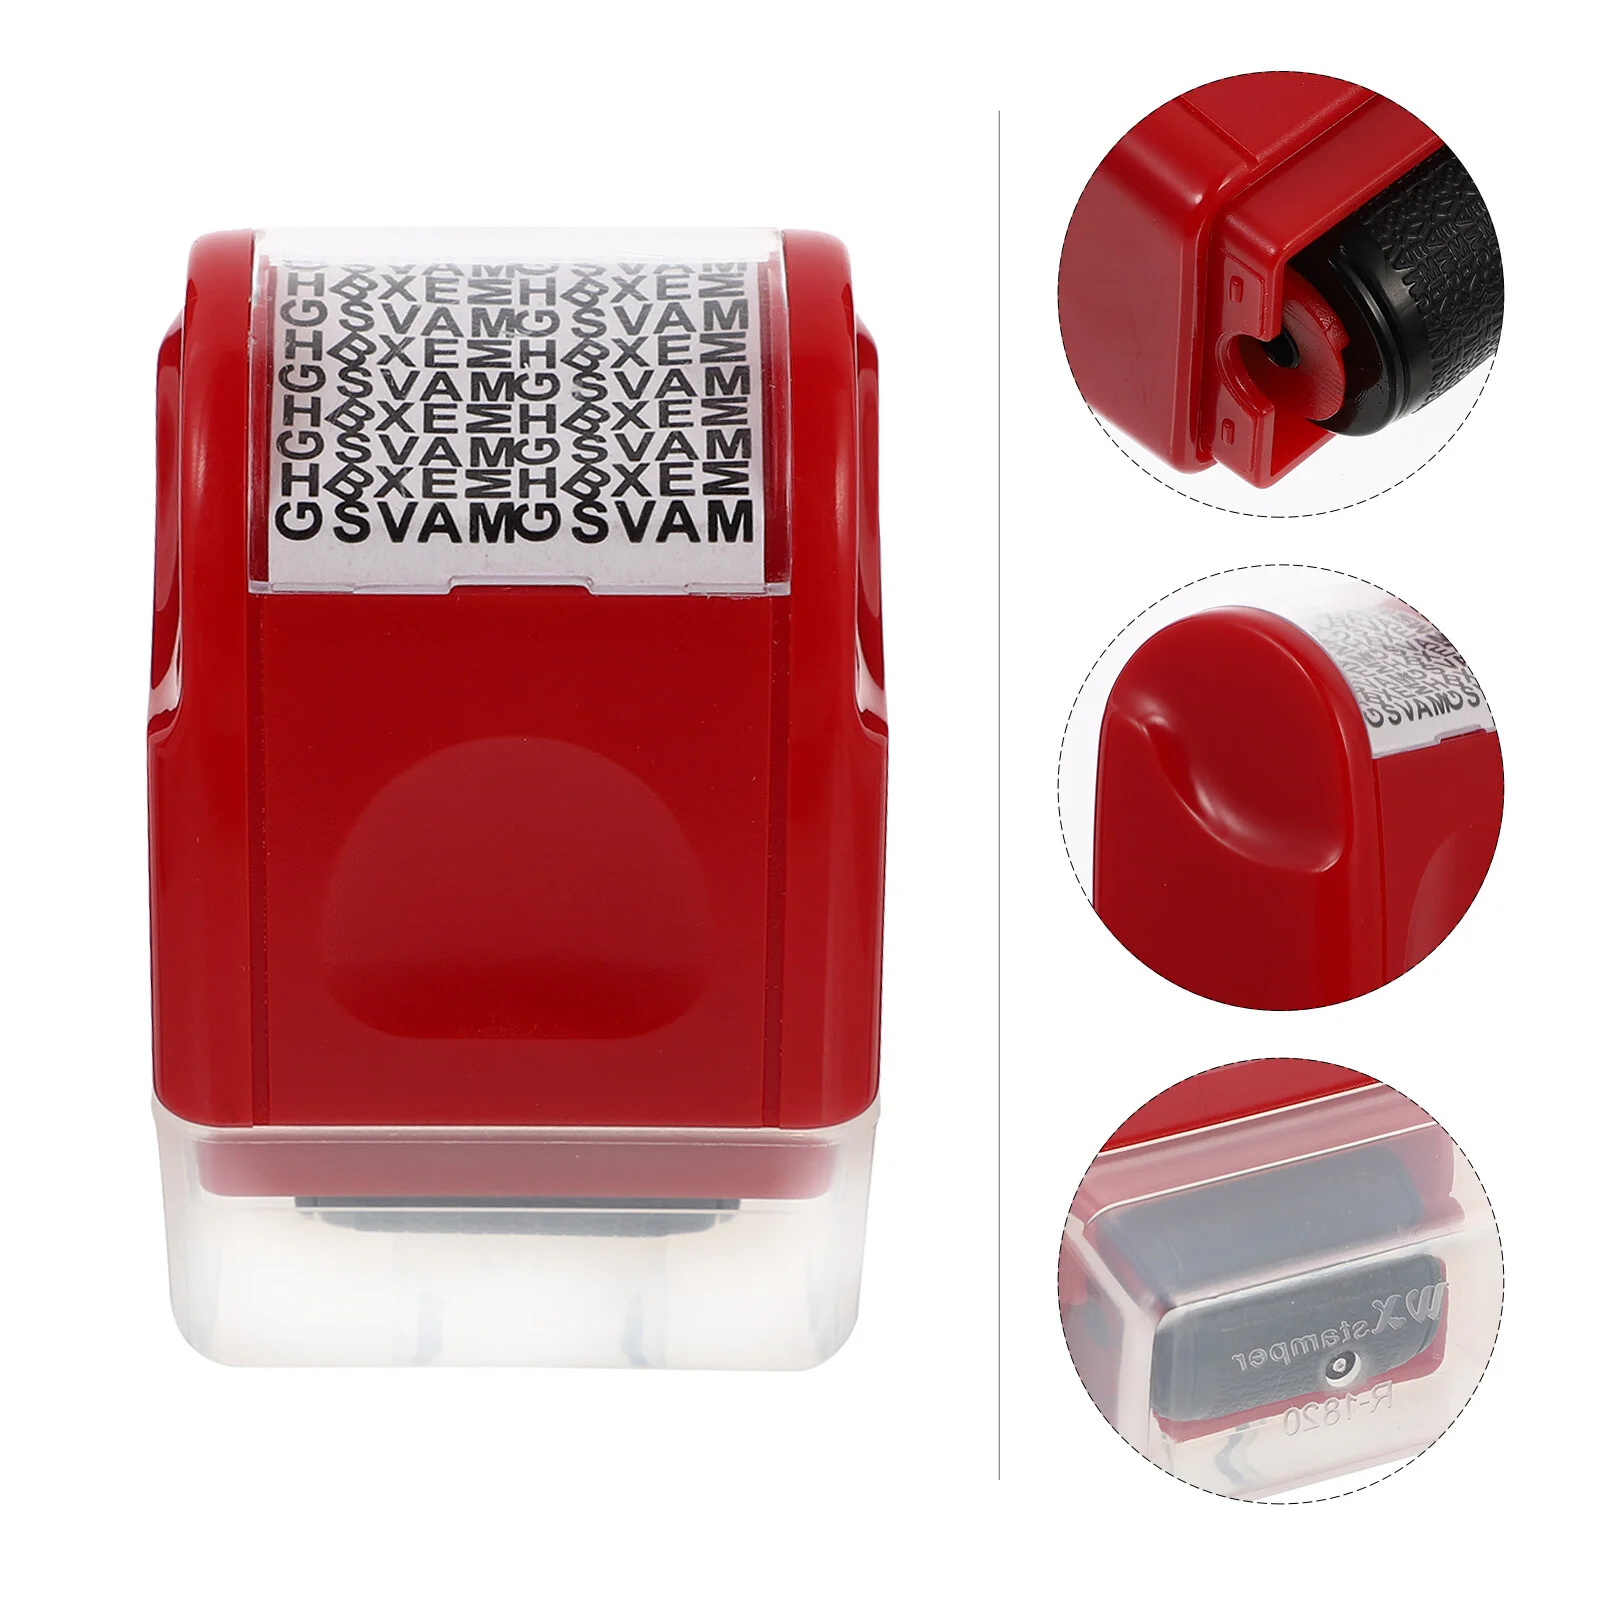 

The The The Name Stamp Confidentiality Seal Security Personal Private Anti-counterfeiting 6x4x3cm Red Plastic